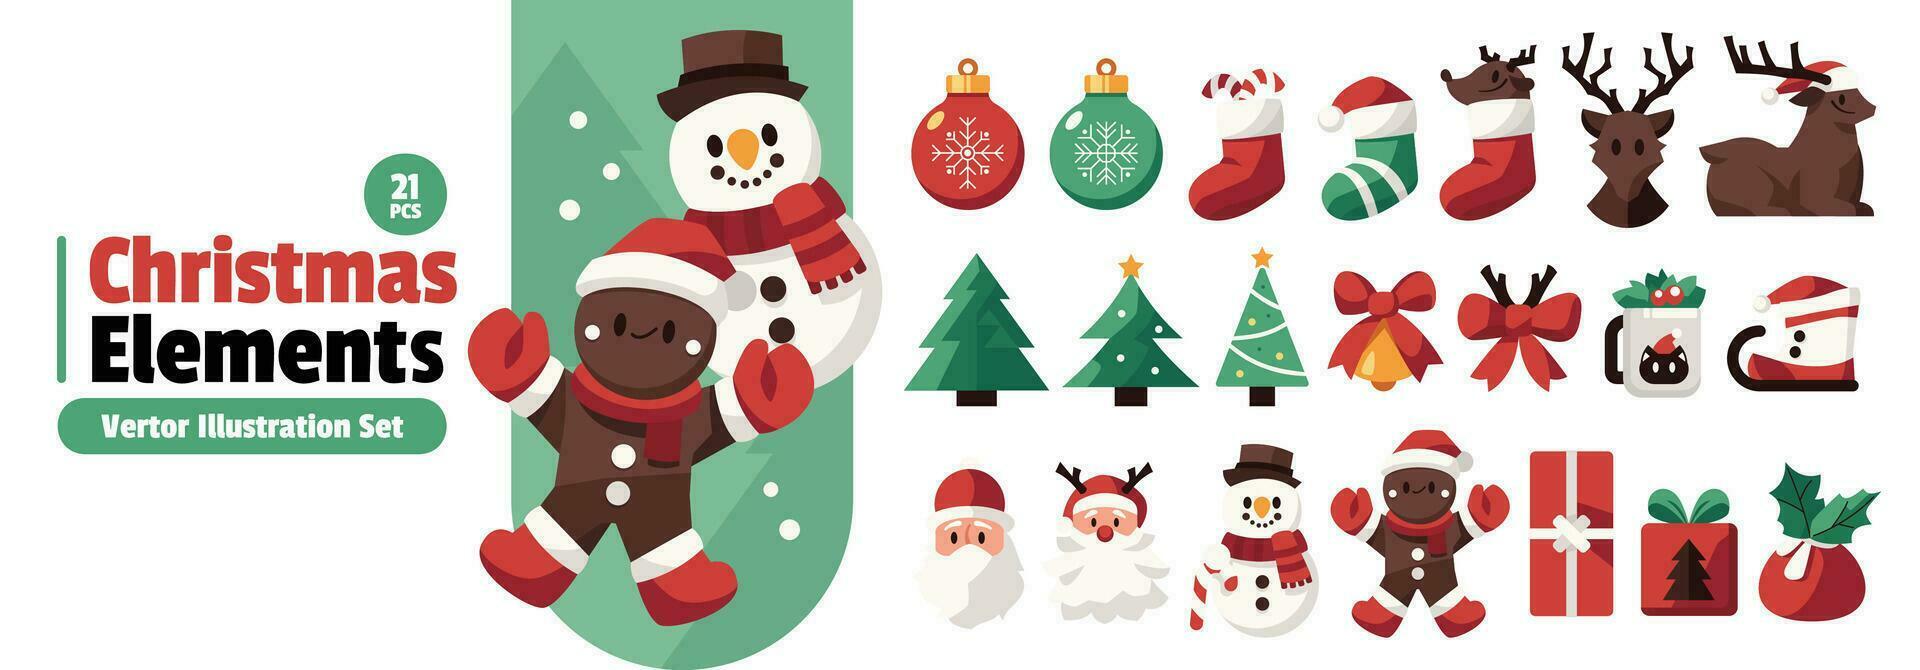 Christmas Elements Set Vector Illustration for Design Projects